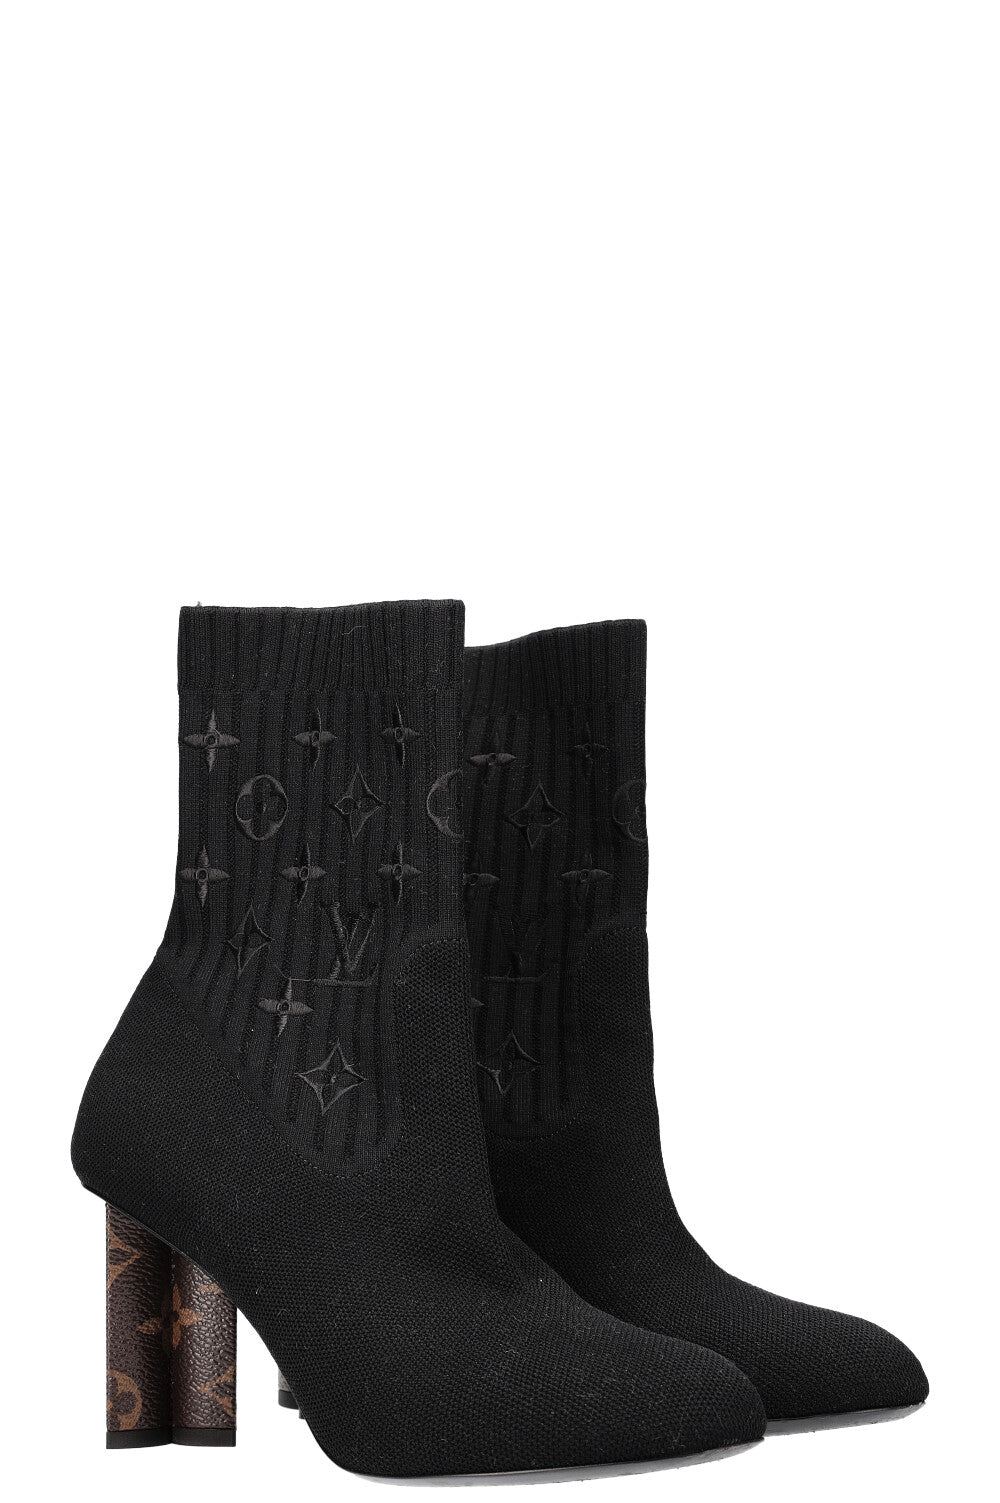 LOUIS VUITTON Silhouette Ankle Boots